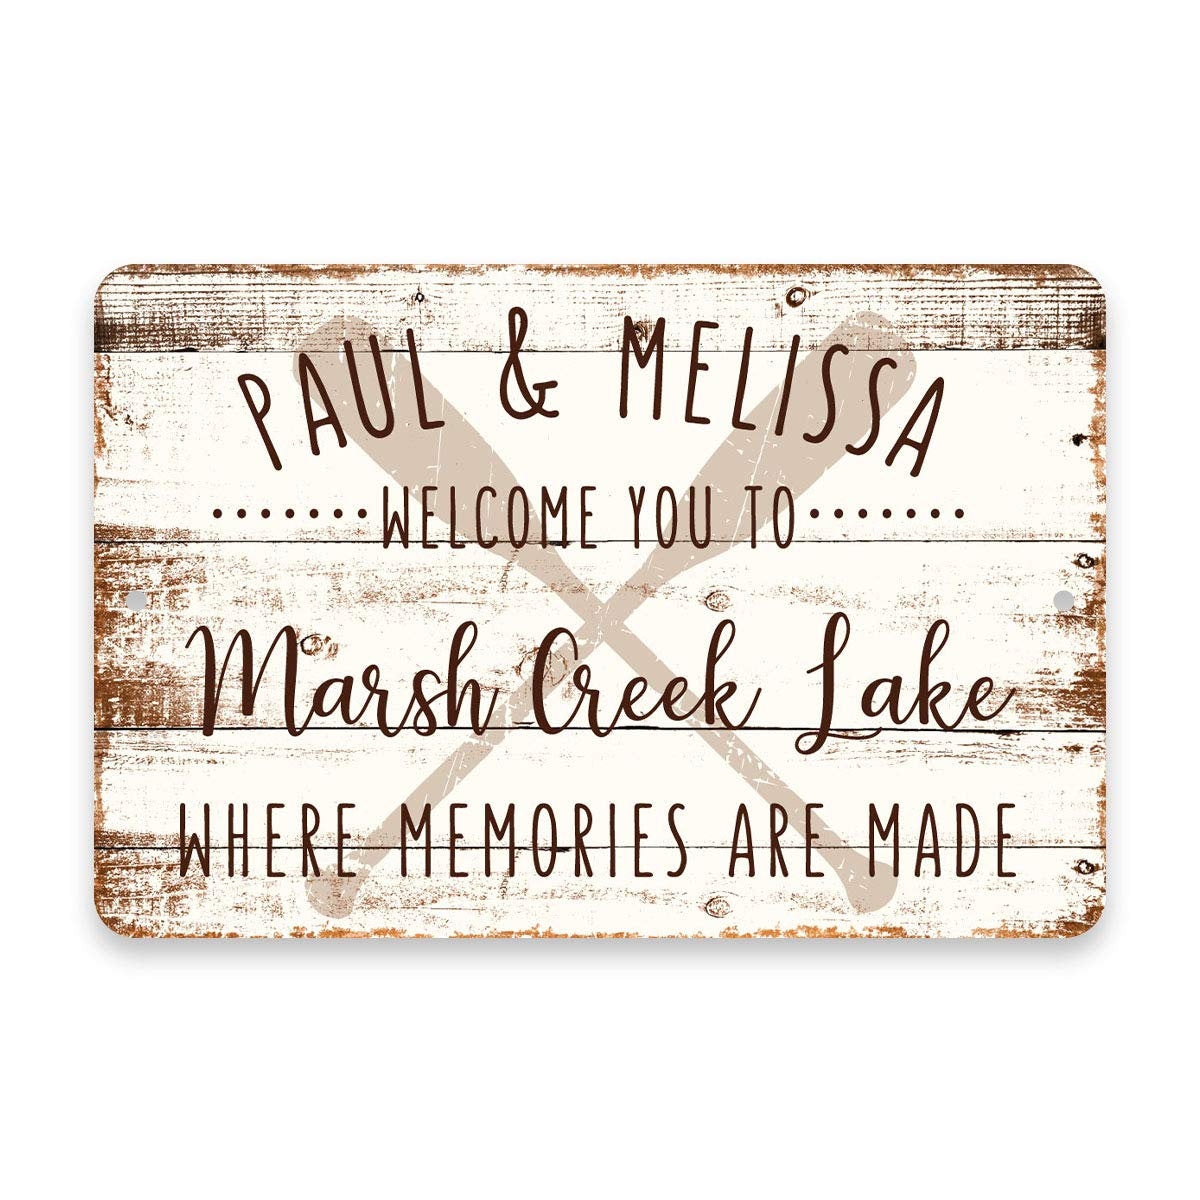 Personalized Welcome to Marsh Creek Lake Where Memories are Made Sign - 8 X 12 Metal Sign with Wood Look